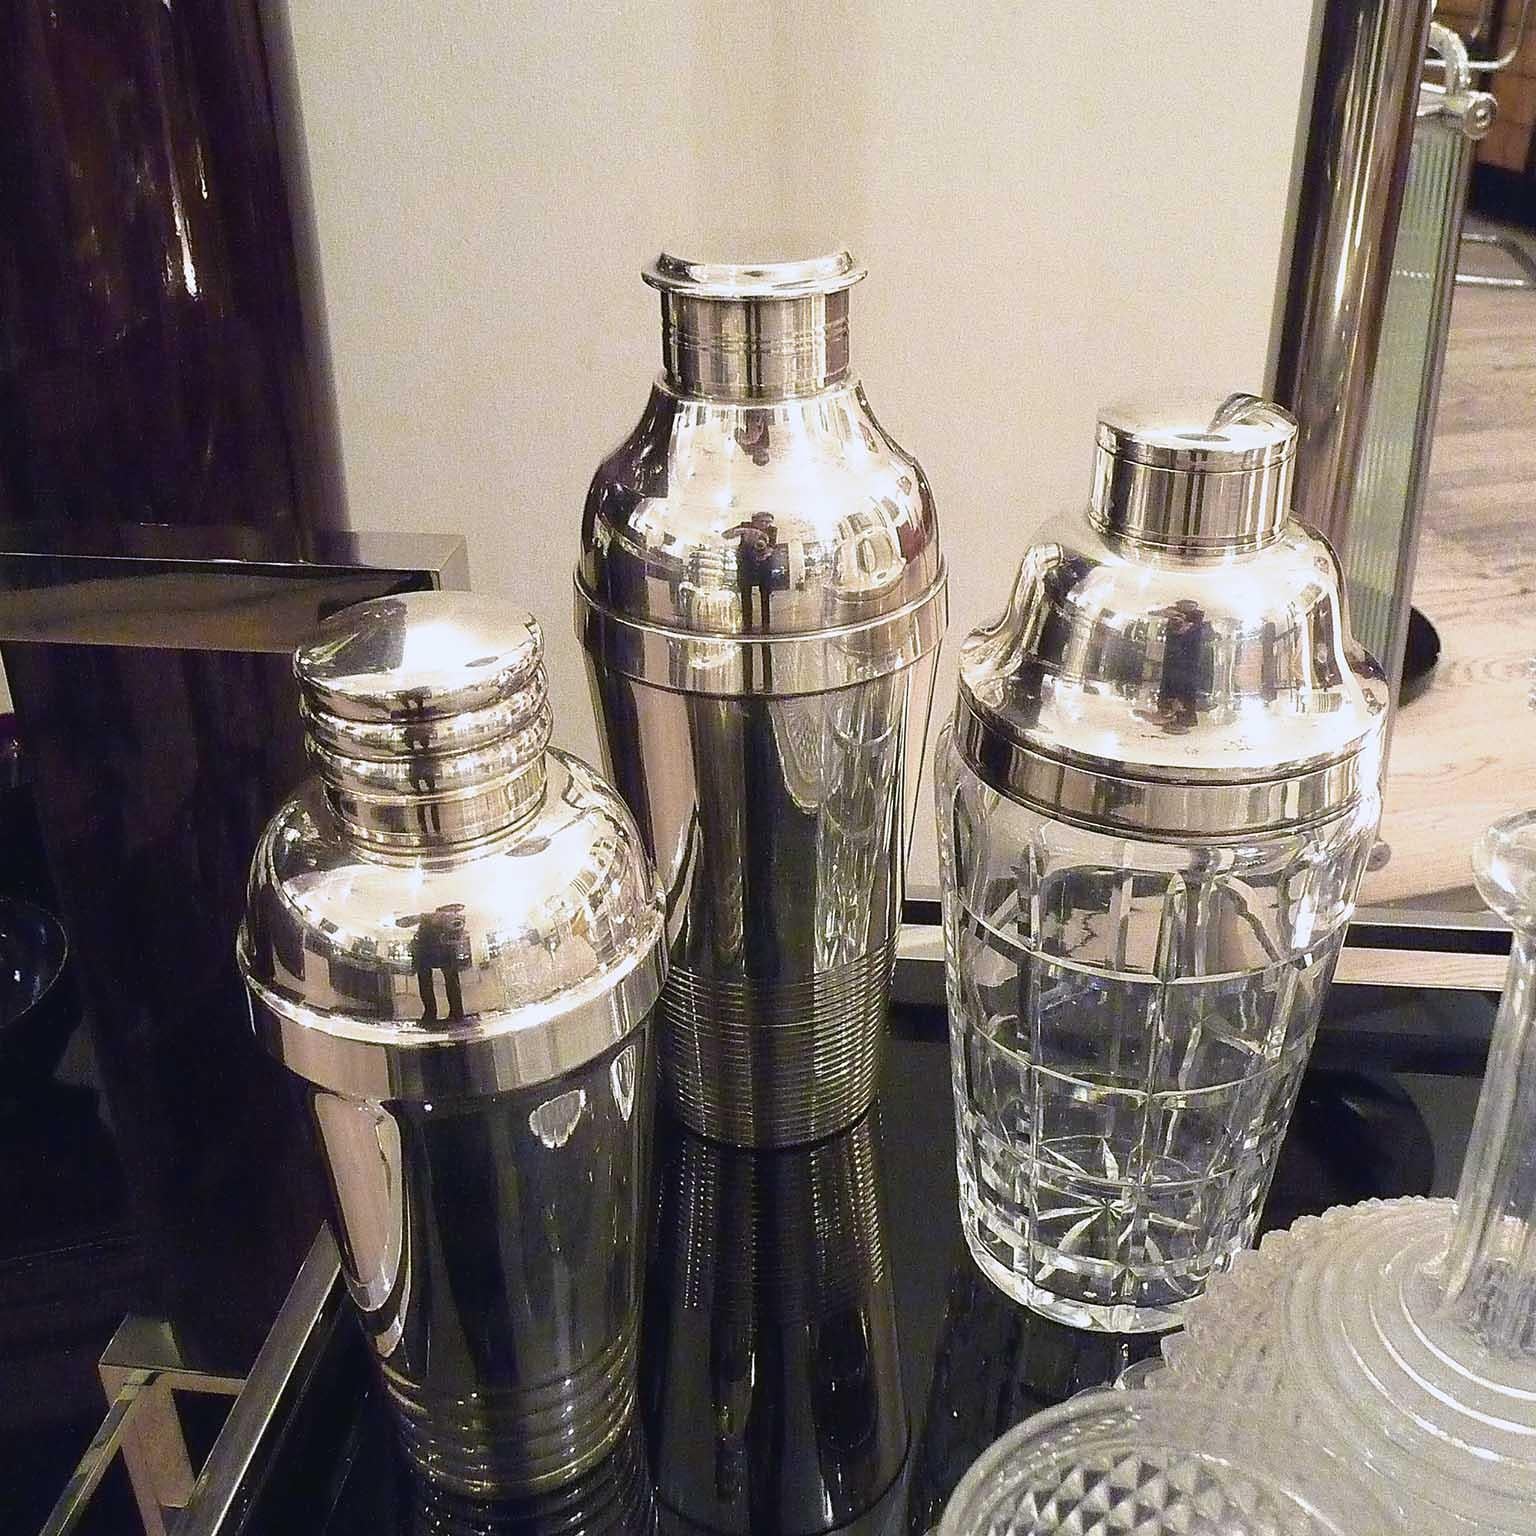 Christofle Gallia cocktail shaker, designed by Luc Lanel.
Silver plated metal. Marked 